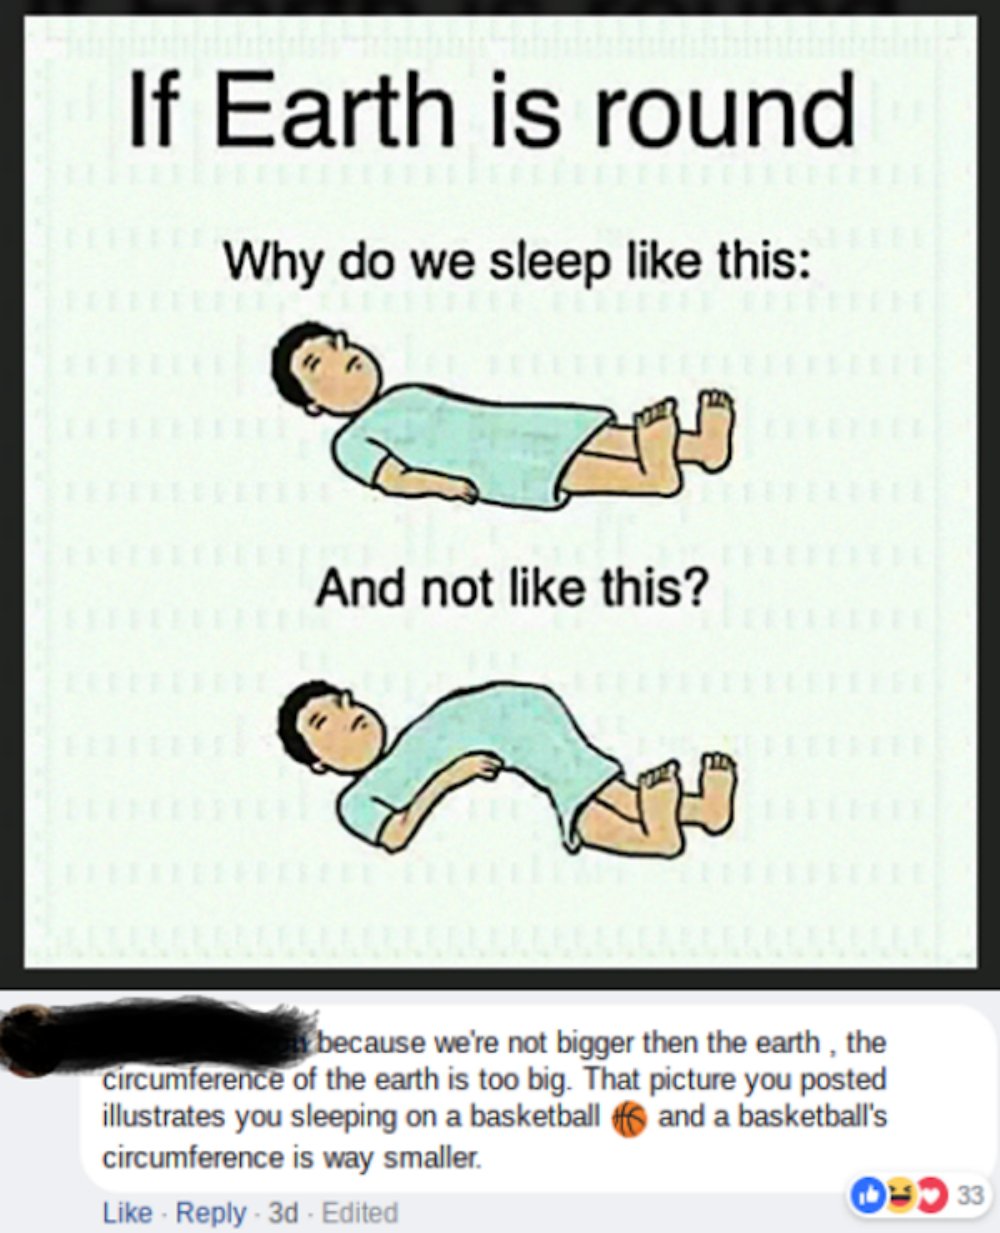 missed - cartoon - If Earth is round Why do we sleep this And not this? because we're not bigger then the earth, the circumference of the earth is too big. That picture you posted illustrates you sleeping on a basketball and a basketball's circumference i